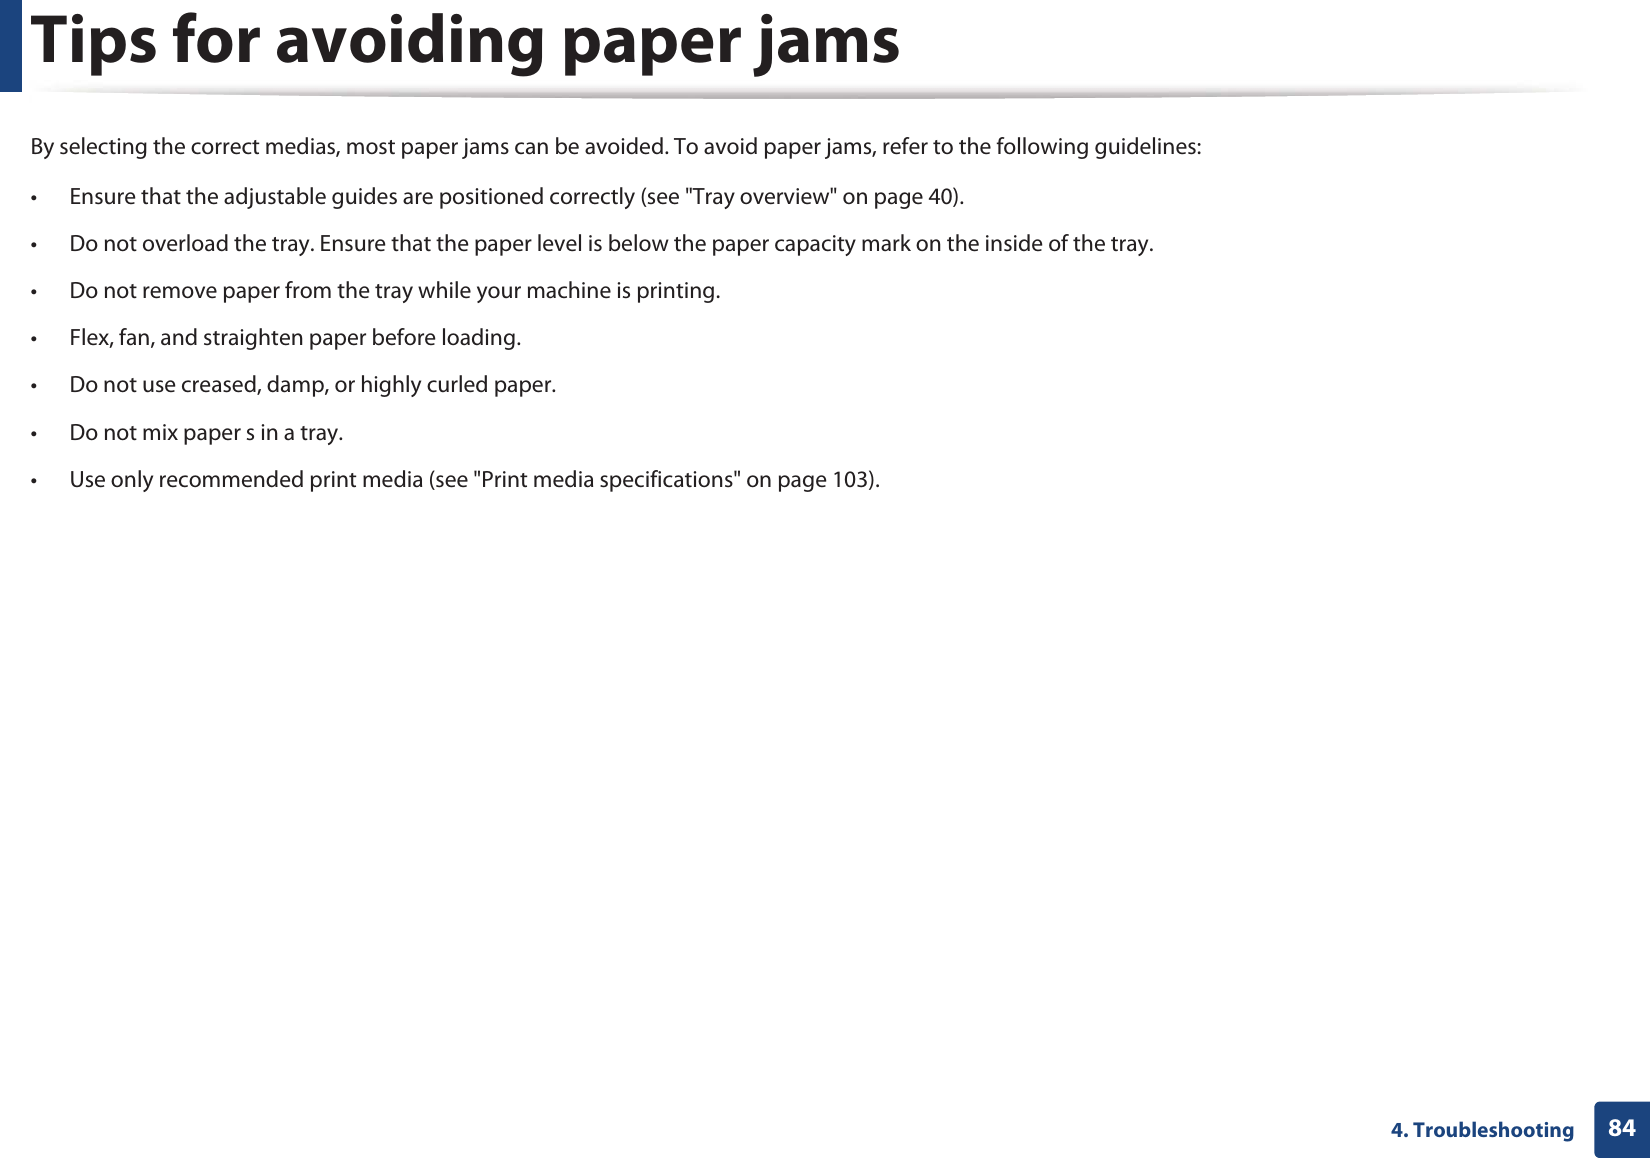 844. TroubleshootingTips for avoiding paper jamsBy selecting the correct medias, most paper jams can be avoided. To avoid paper jams, refer to the following guidelines:• Ensure that the adjustable guides are positioned correctly (see &quot;Tray overview&quot; on page 40).• Do not overload the tray. Ensure that the paper level is below the paper capacity mark on the inside of the tray.• Do not remove paper from the tray while your machine is printing.• Flex, fan, and straighten paper before loading. • Do not use creased, damp, or highly curled paper.• Do not mix paper s in a tray.• Use only recommended print media (see &quot;Print media specifications&quot; on page 103).